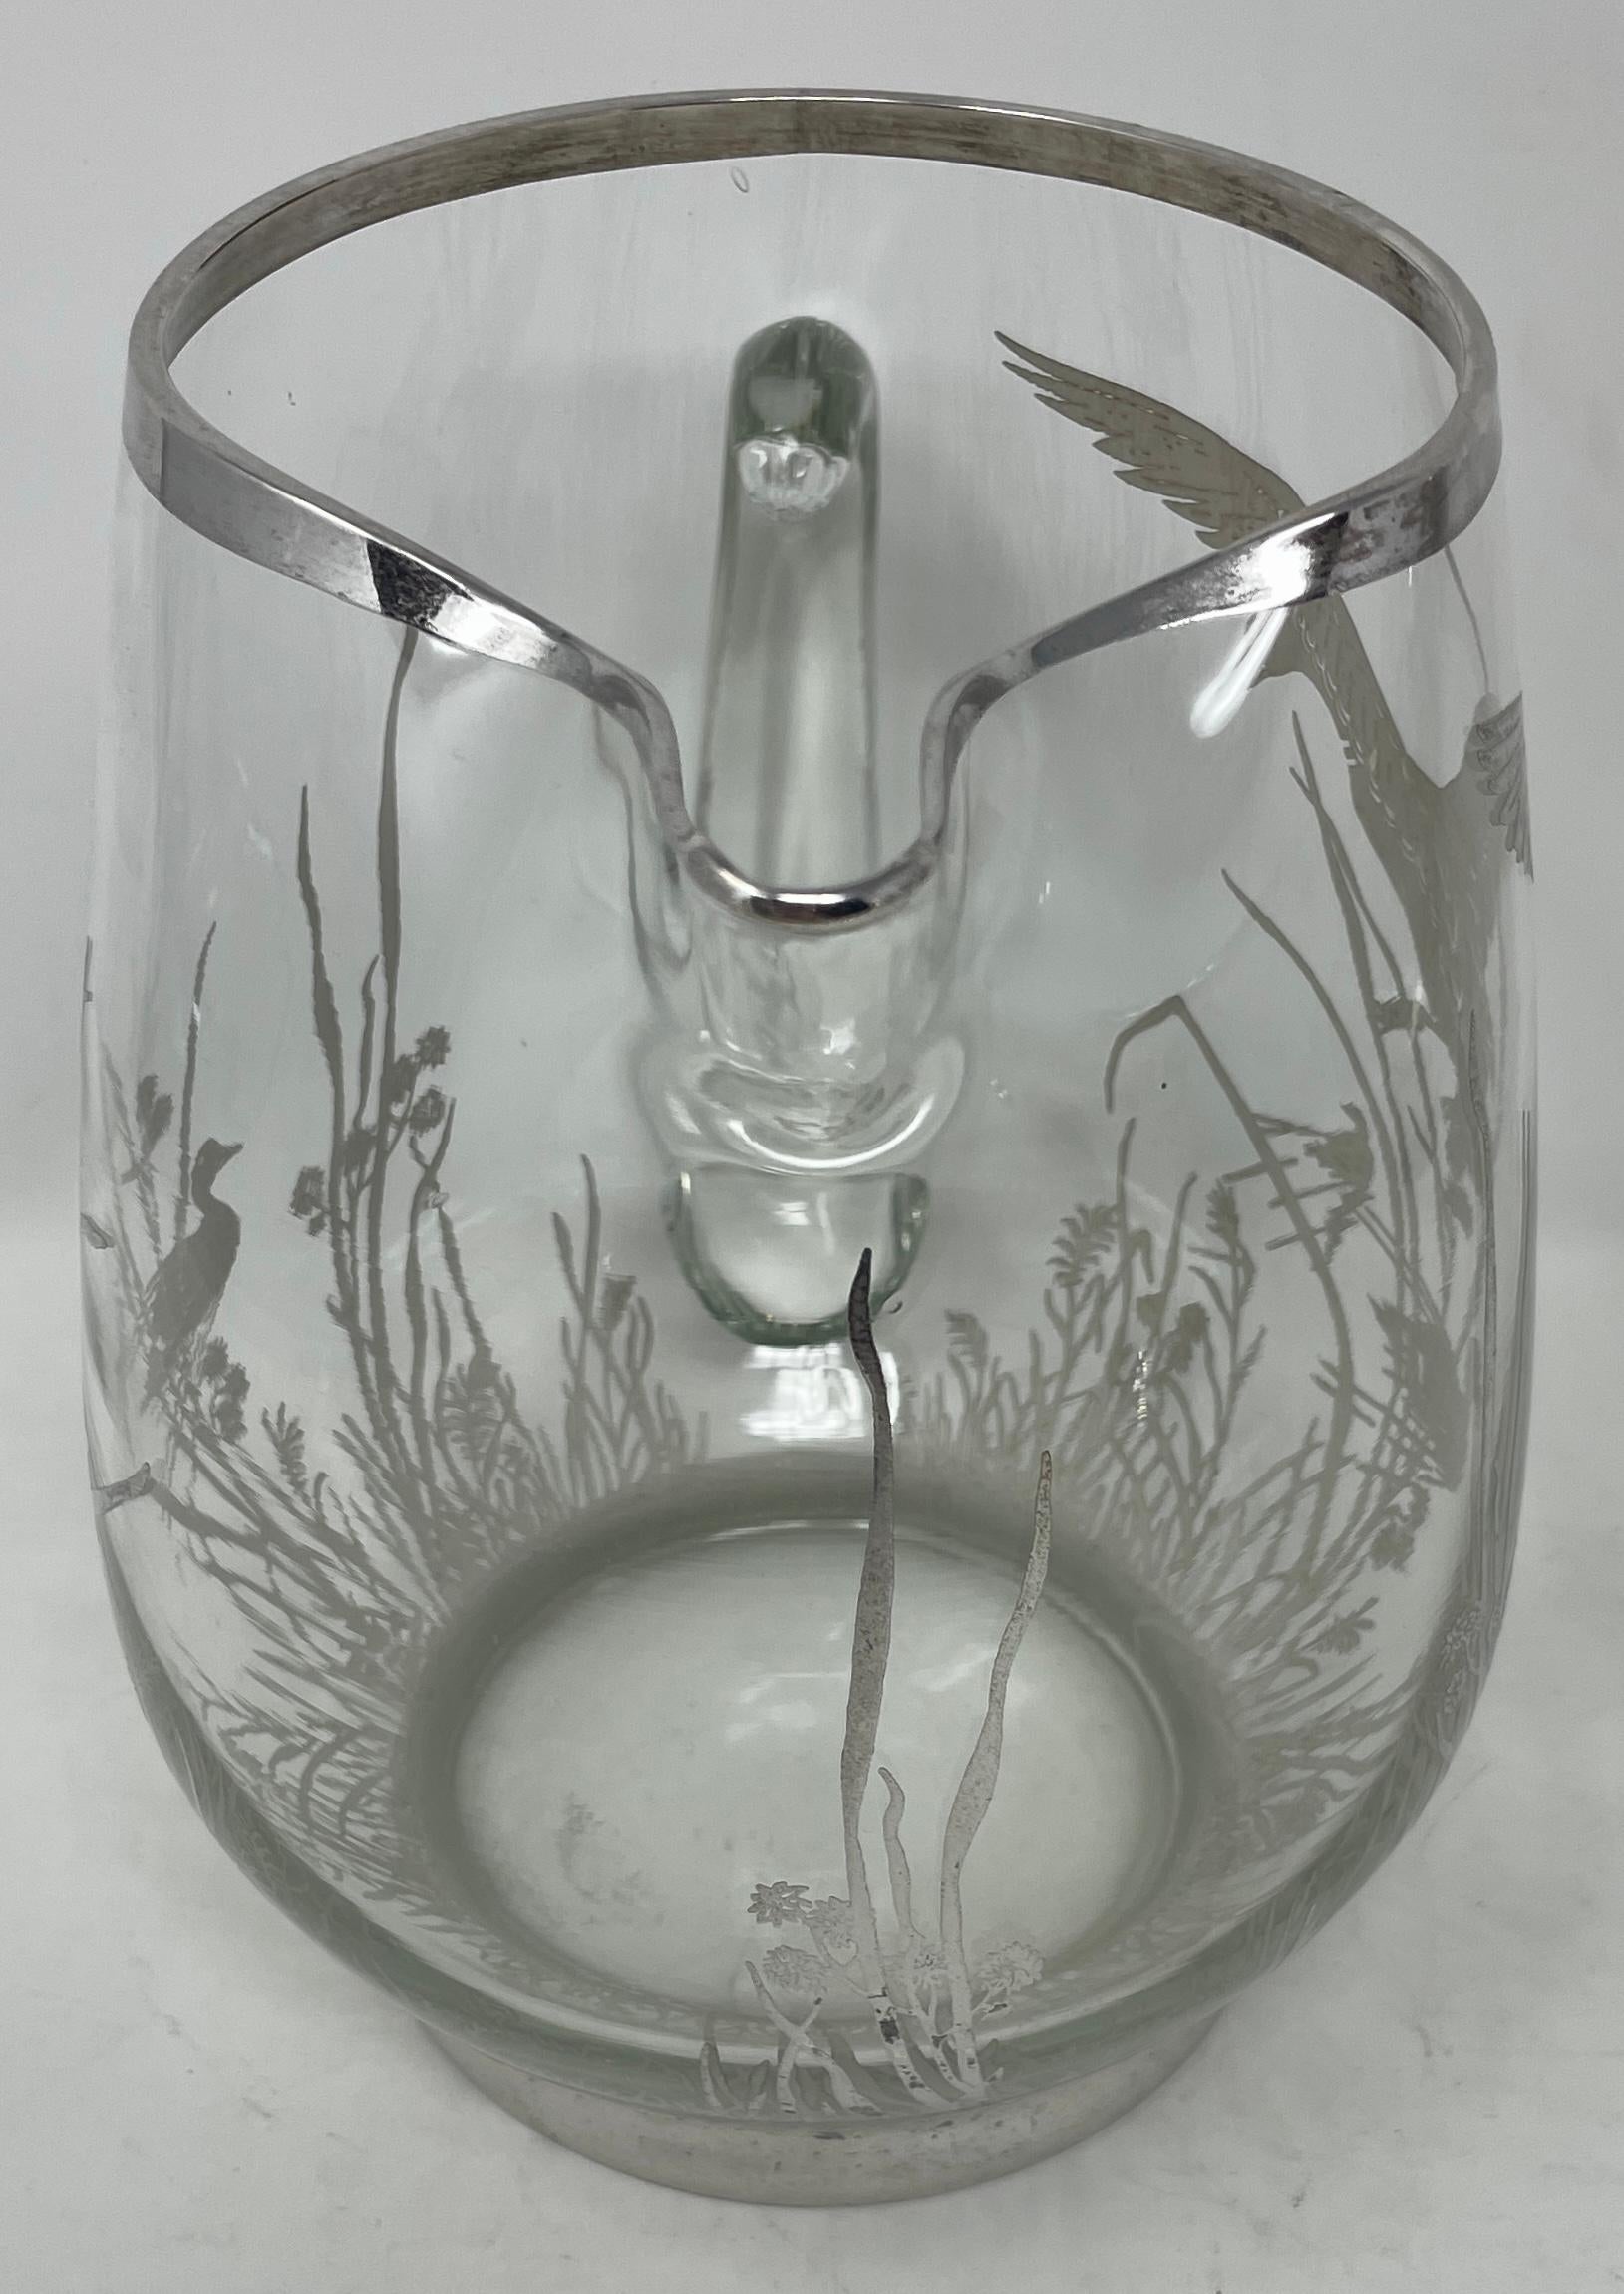 Estate Art Deco silvered cut crystal cocktail pitcher, circa 1930s.
Beautiful Silver Overlay of Birds, Ducks and Marsh Grasses.